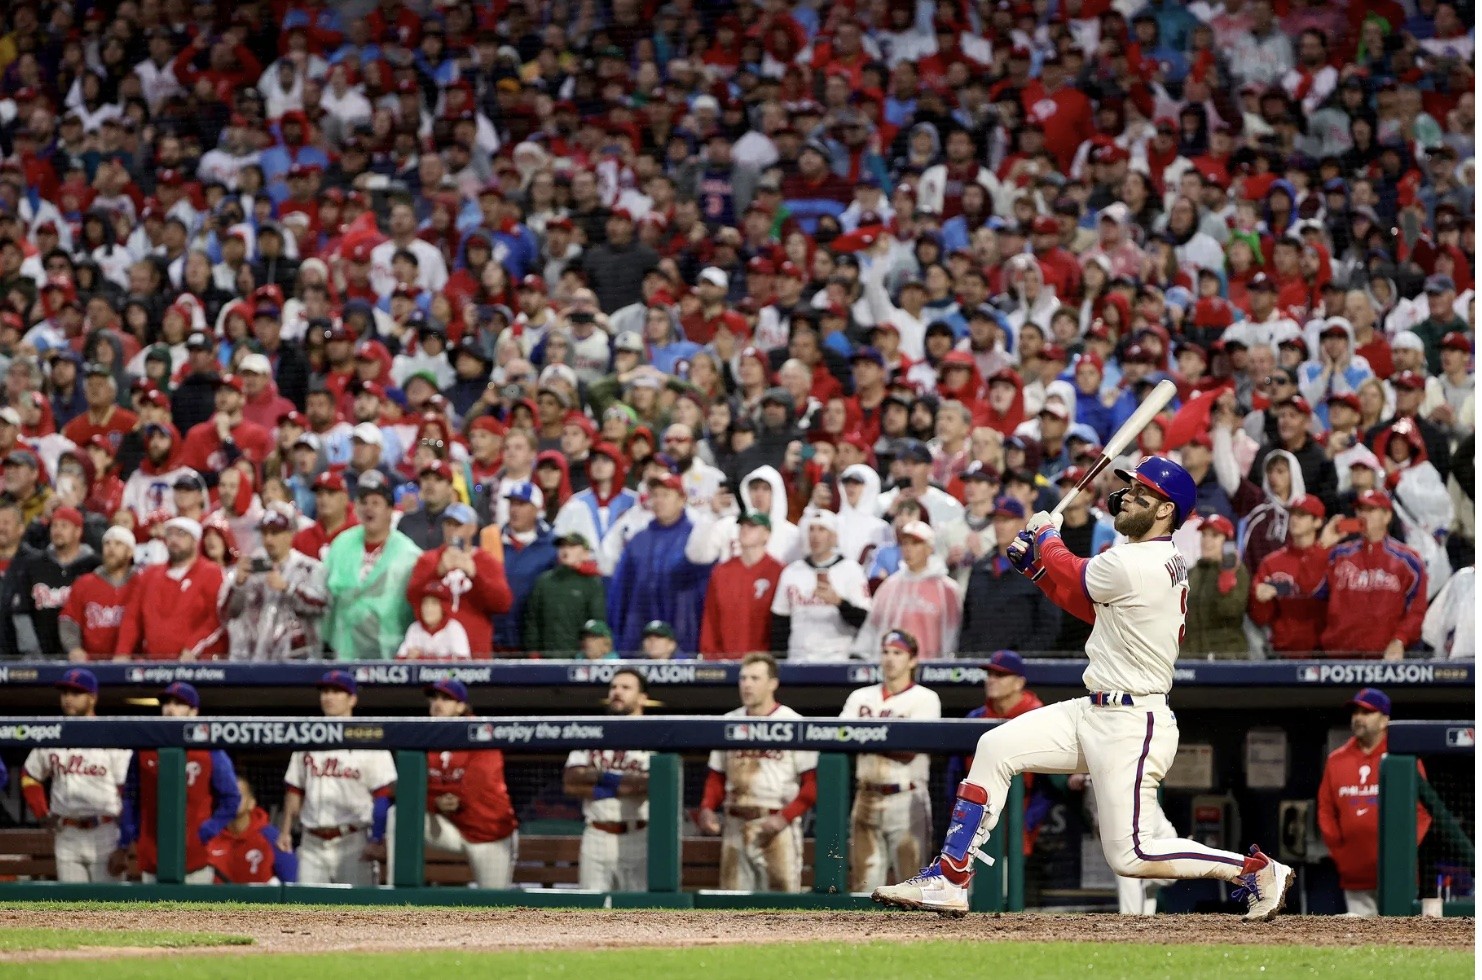 Phillies series preview: Can they make another post-season run